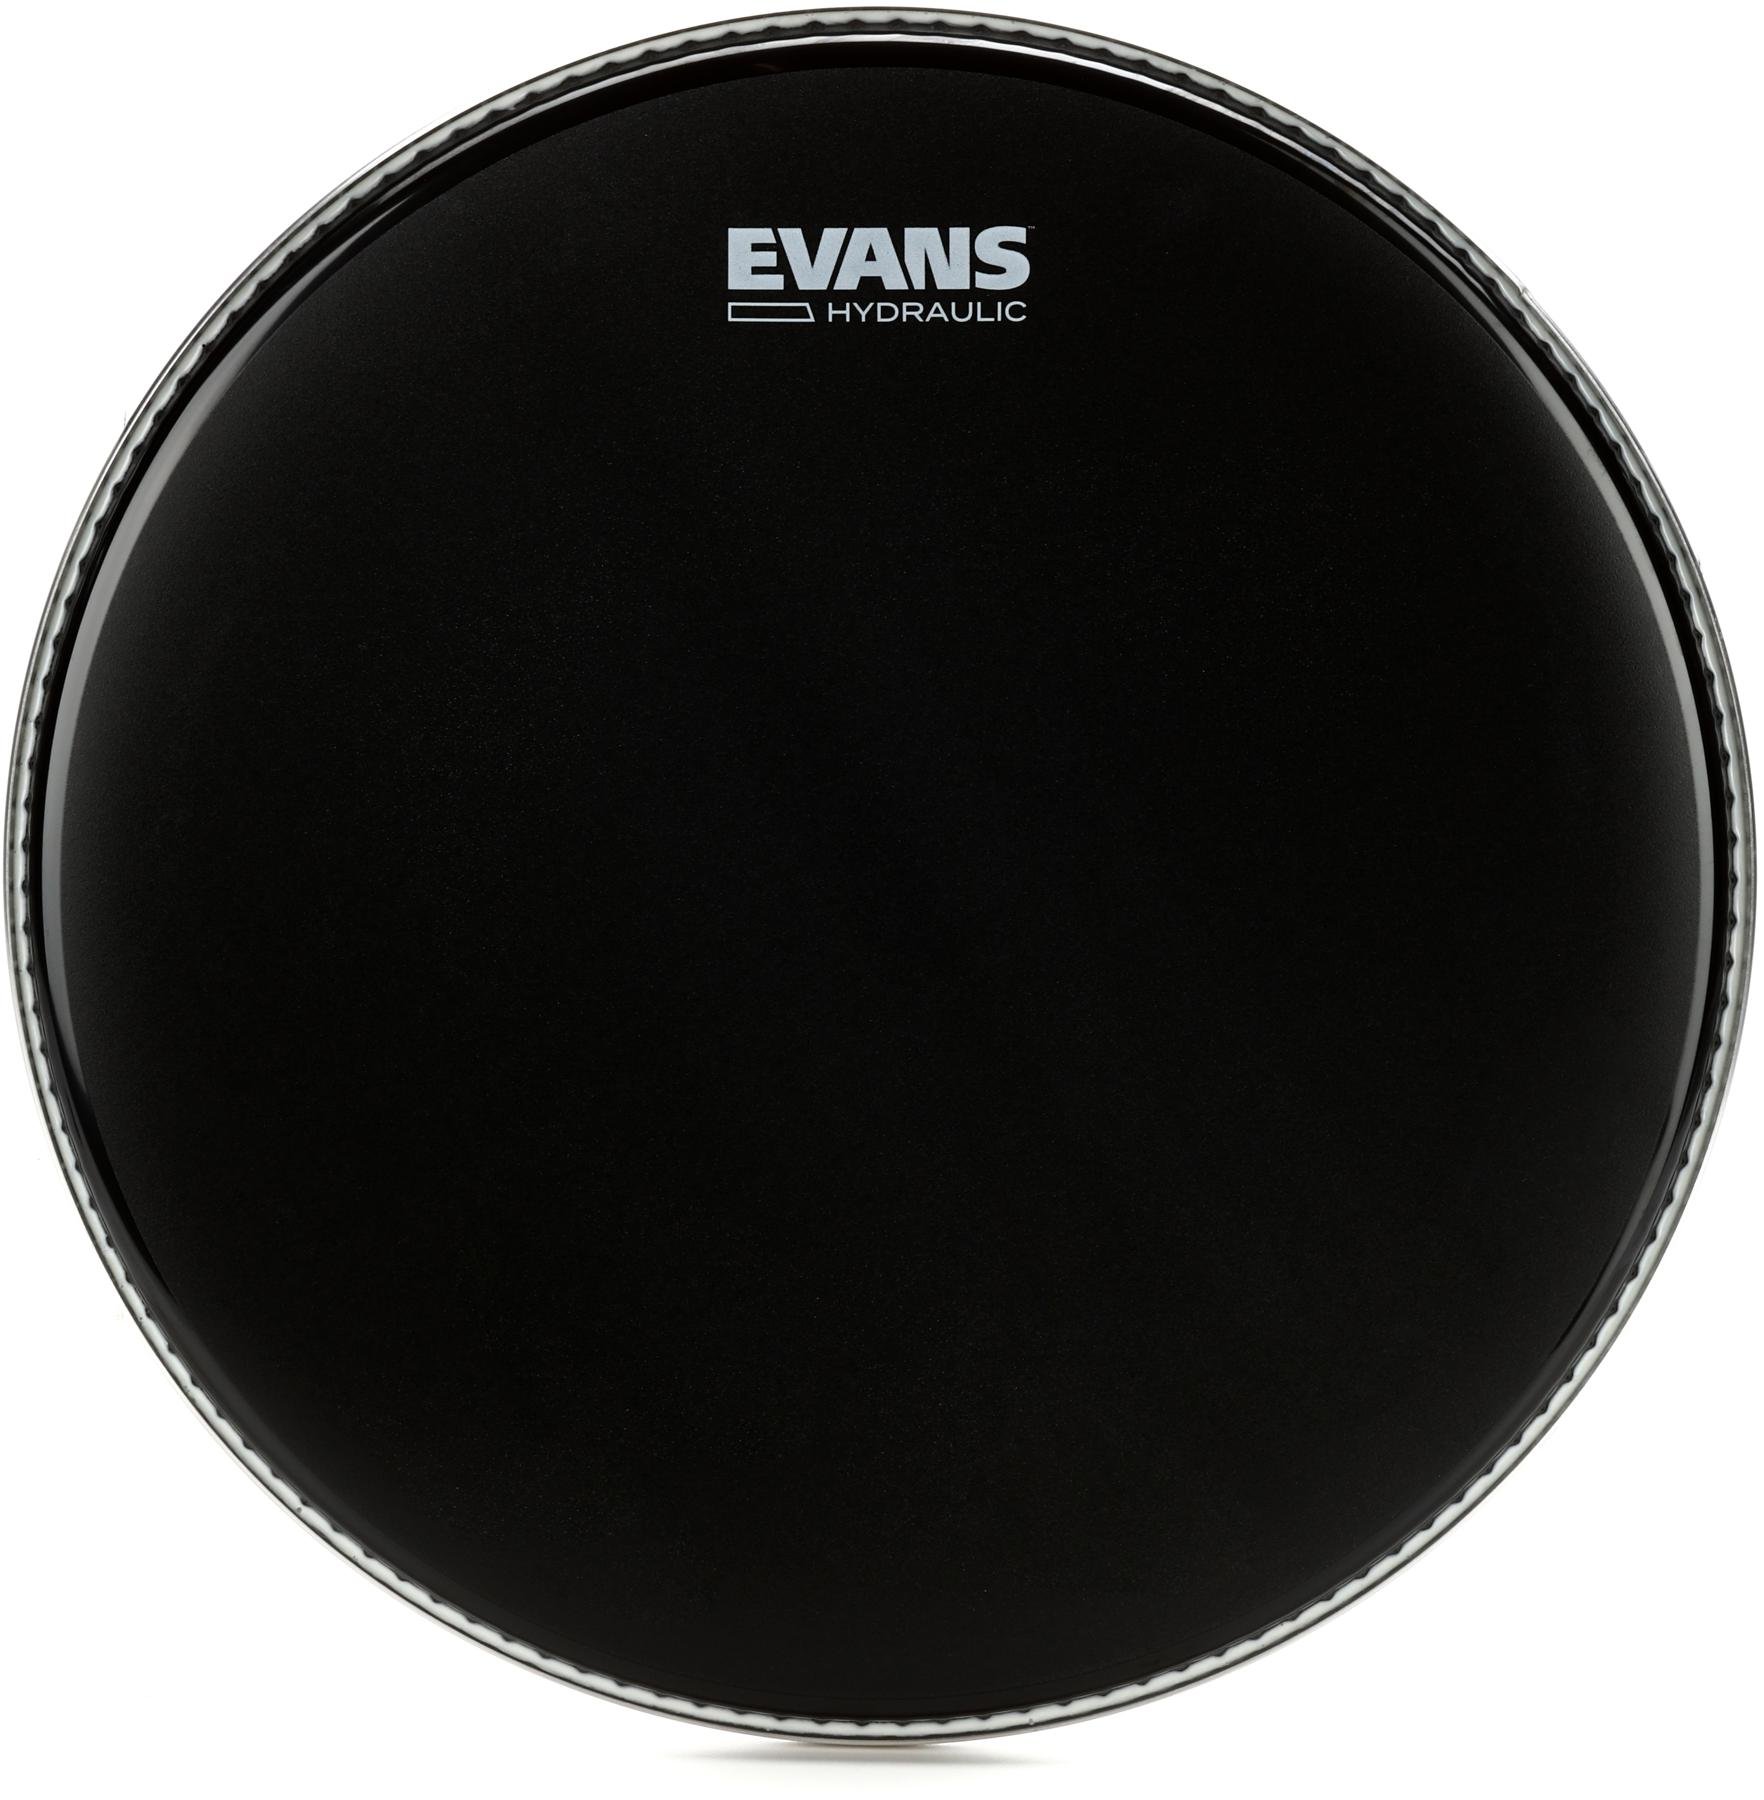 Evans Hydraulic Black Coated Snare Head 